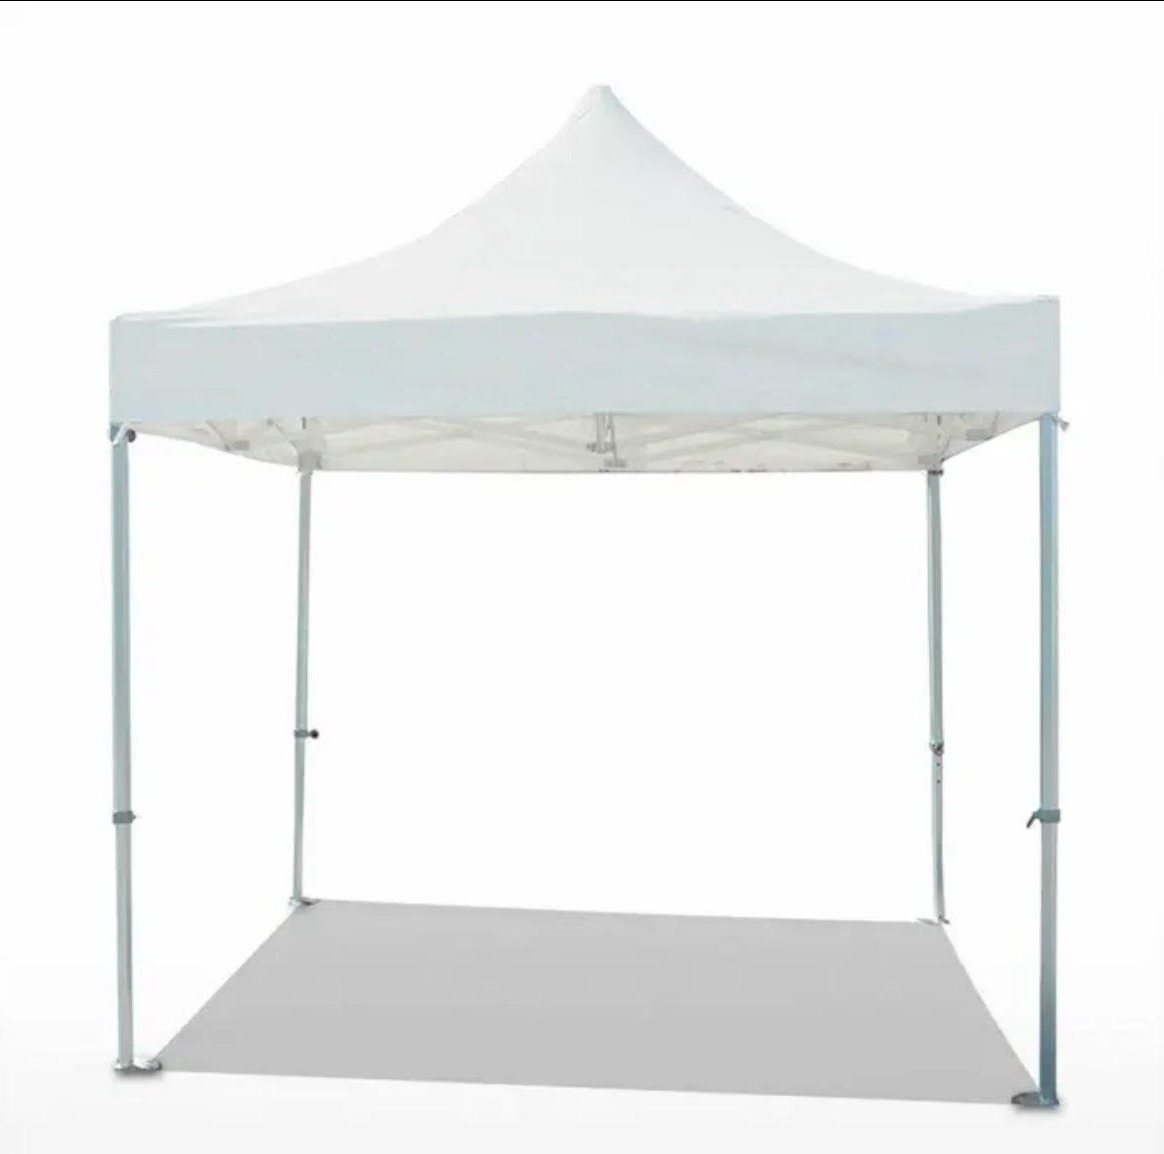 10x10 Commercial Pop Up Frame Tent 